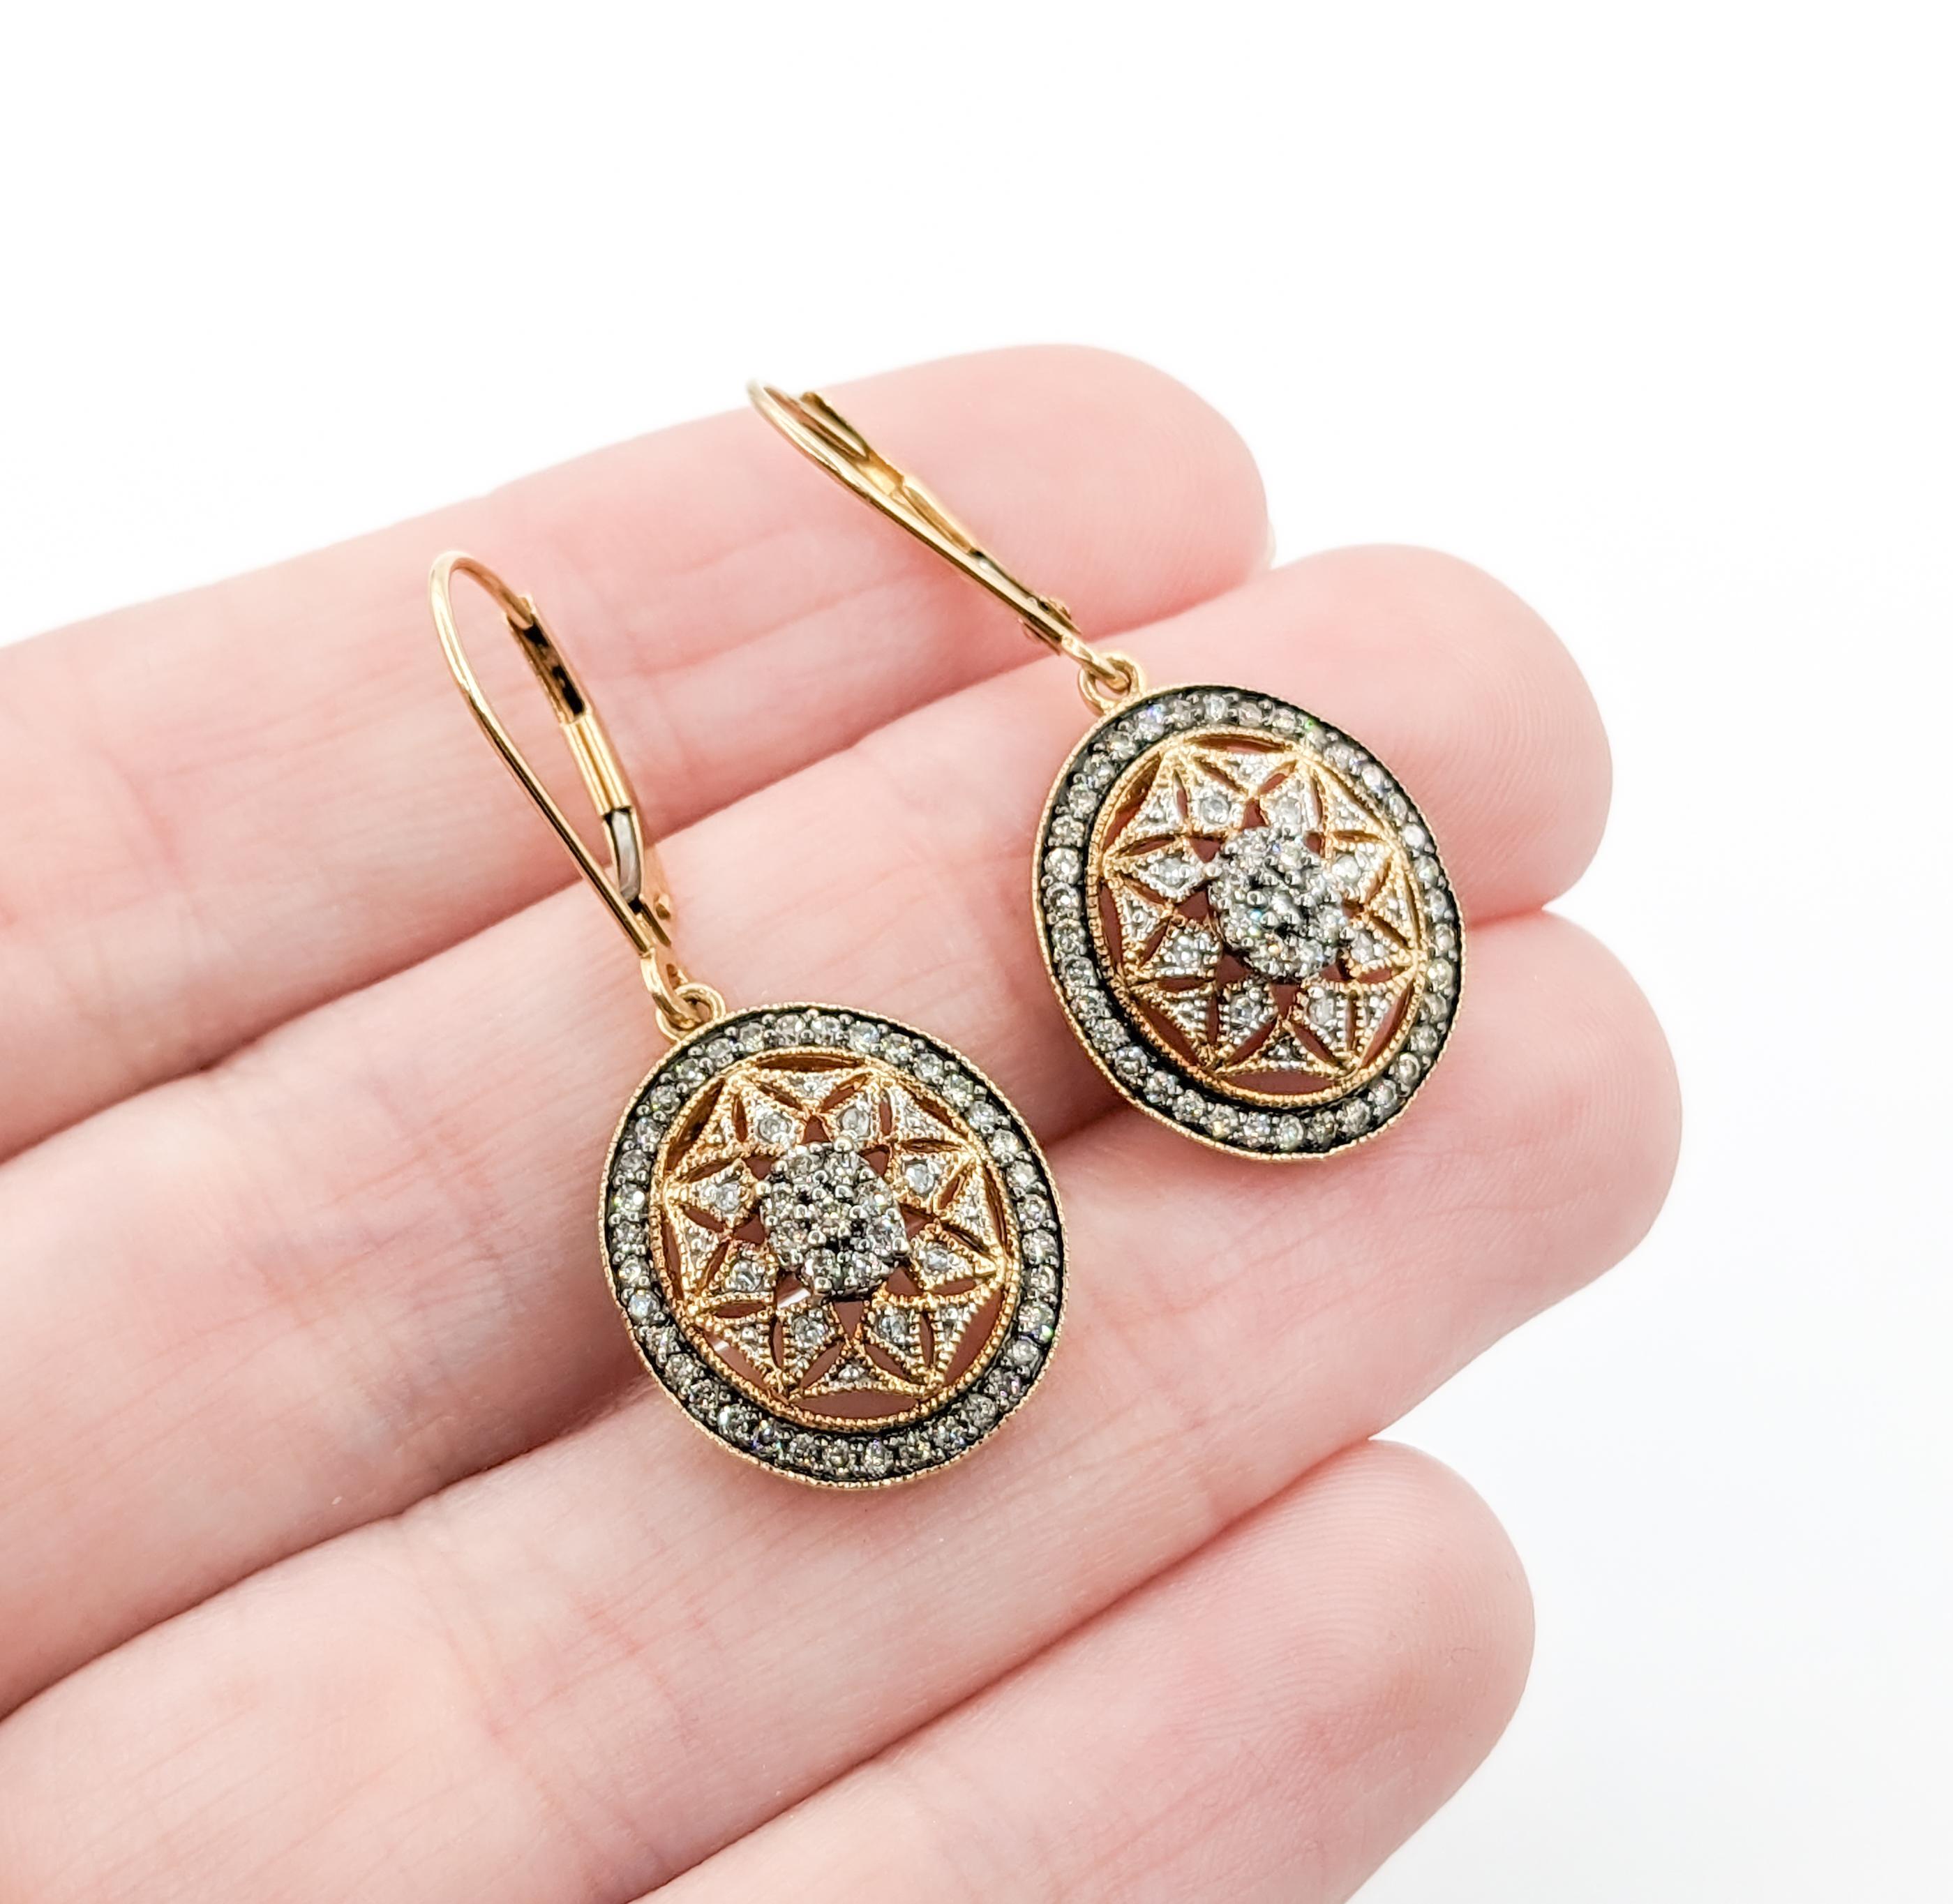 Glittering Diamond Star Drop earrings in 10K Gold

Introducing these exquisite diamond earrings, meticulously crafted from lustrous 10-karat yellow gold. Adorned with a dazzling ensemble of round diamonds totaling 0.50 carats, these sparkling gems